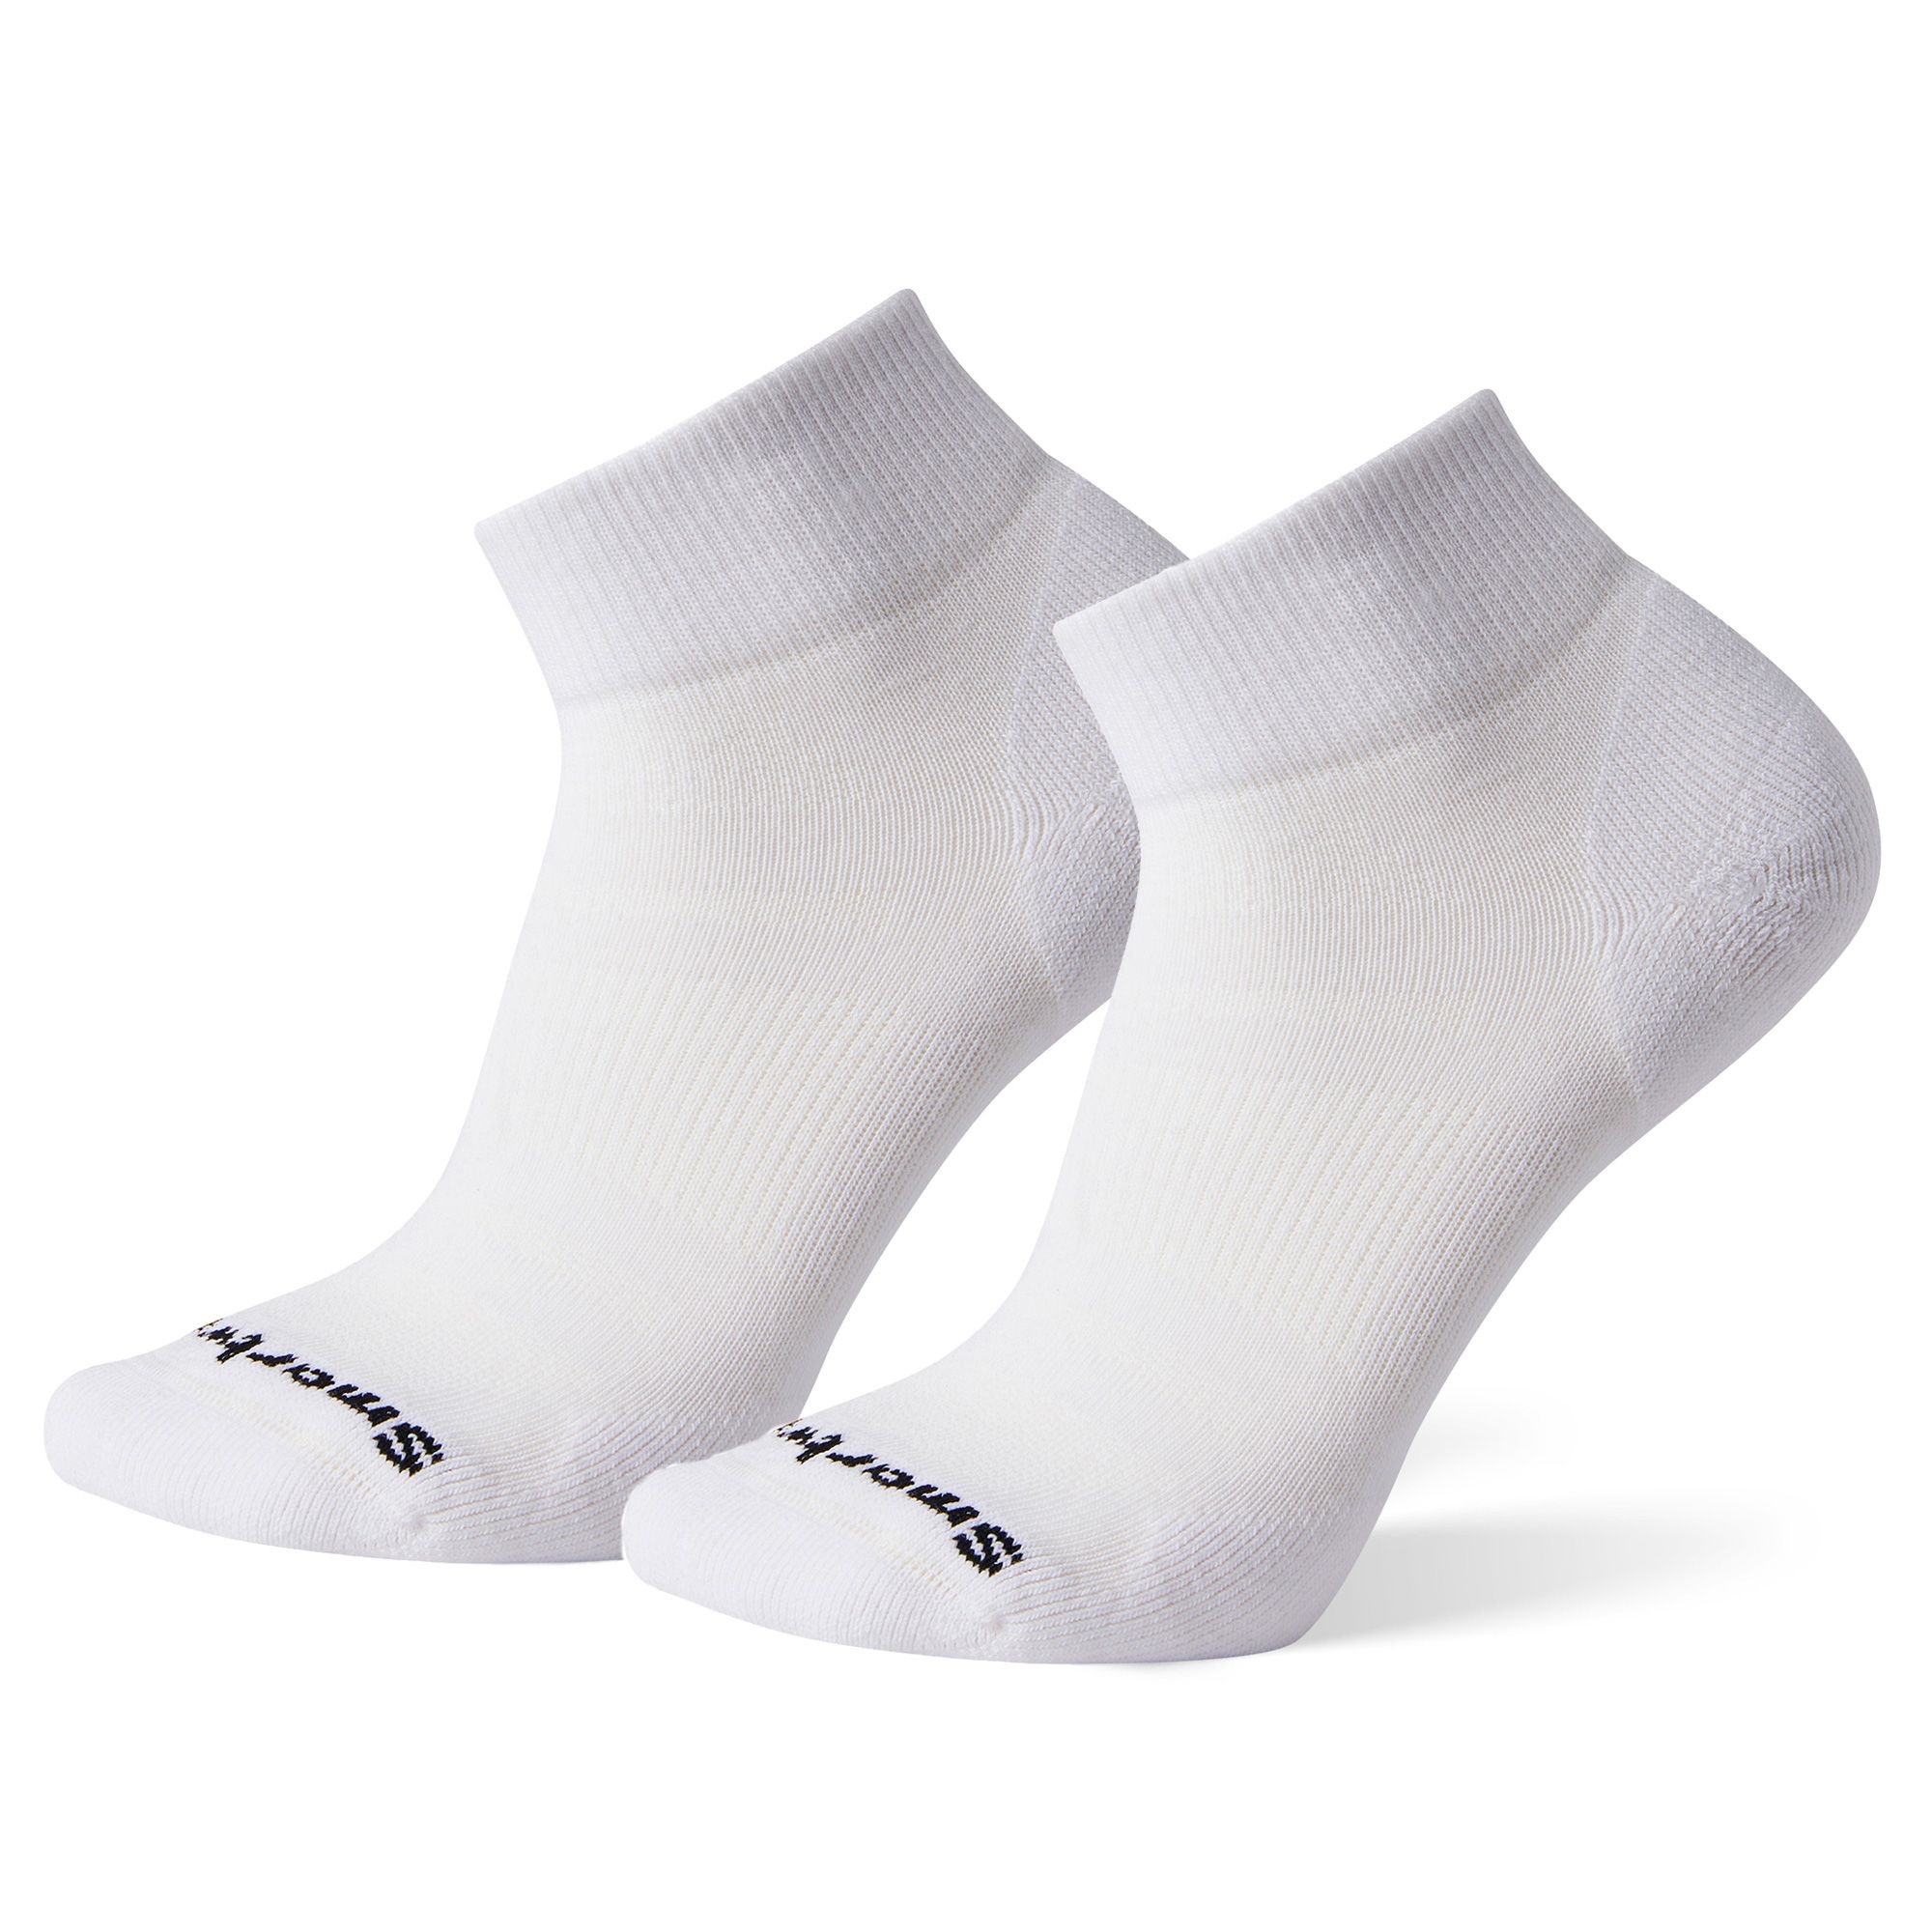 Athletic Targeted Cushion Ankle 2 Pack Socks | Smartwool Canada